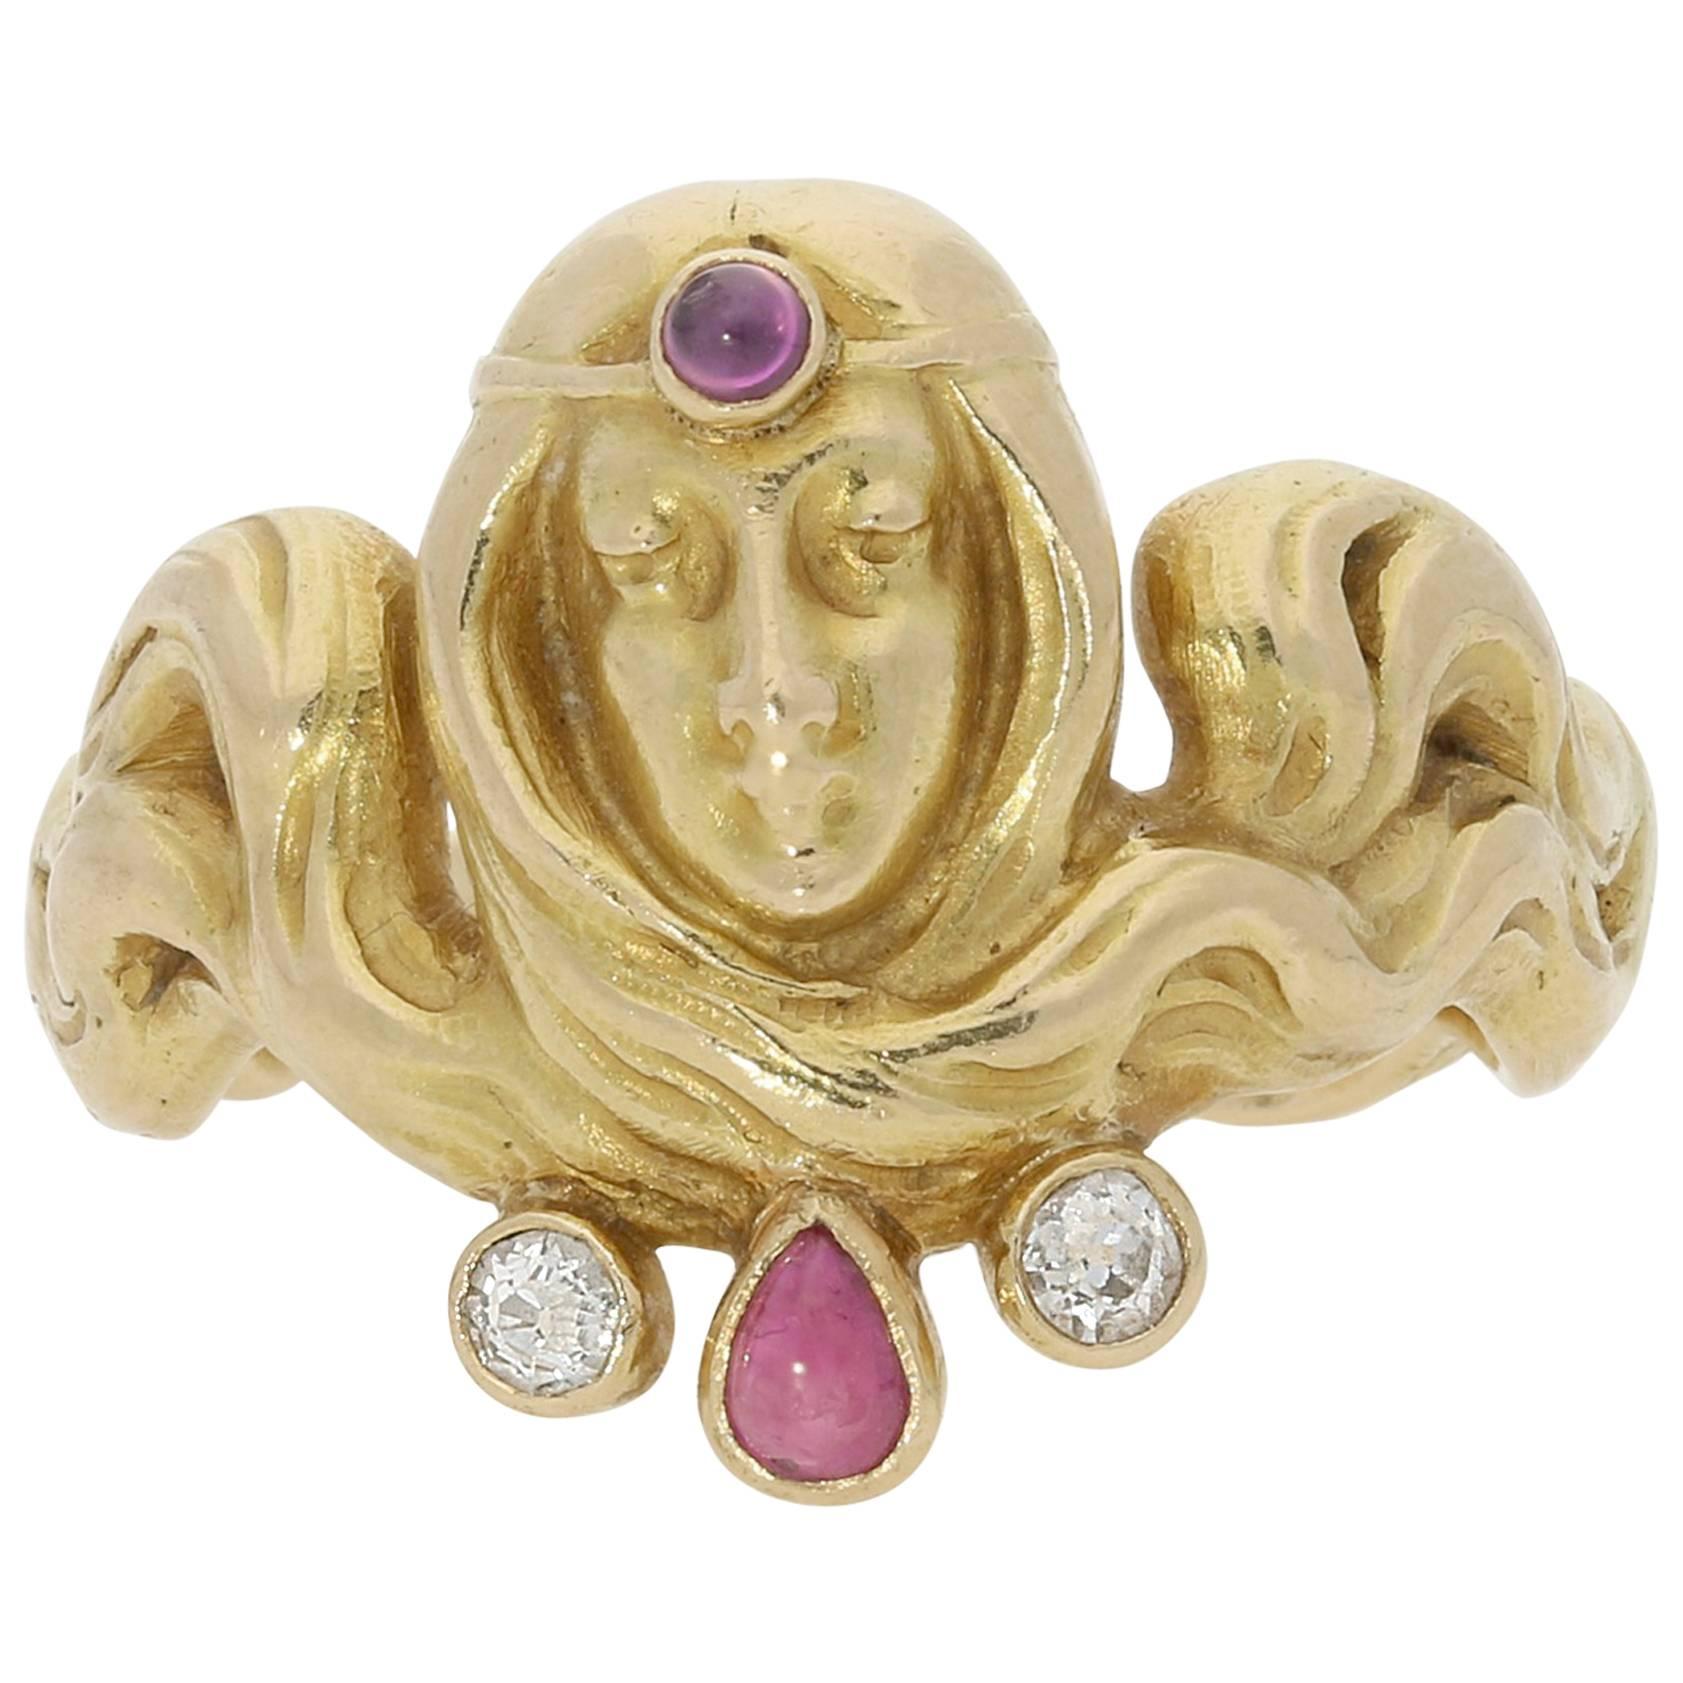 Art Nouveau Gold, Ruby And Diamond Ring By Sandoz, c.1900